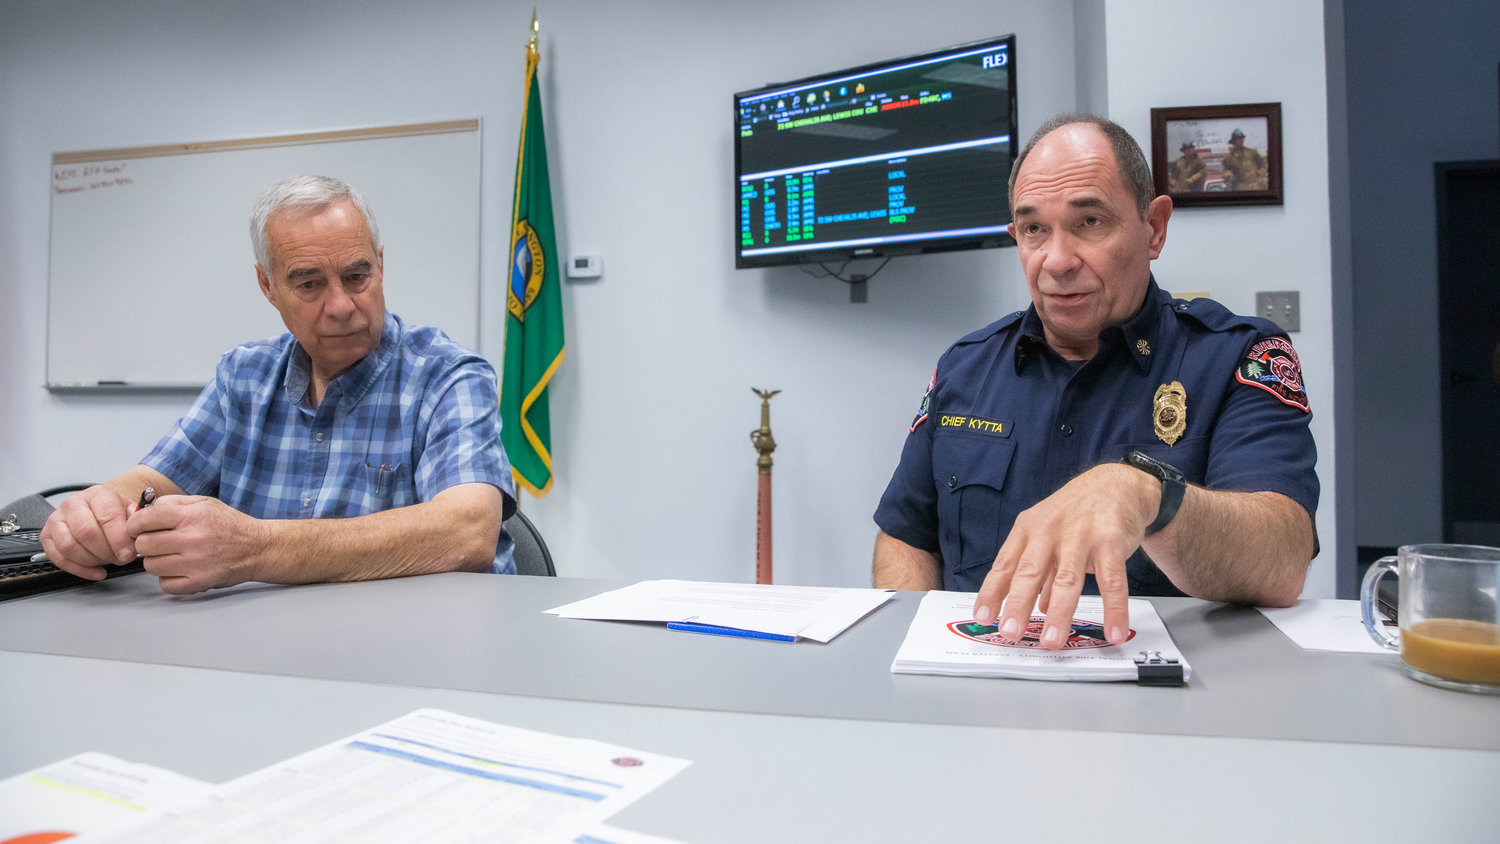 Gregg Peterson, chief at Lewis County Fire District 13 and Chief Mike Kytta, with Riverside Fire Authority, talk about the levy process and the effects of growth on their service in Centralia on Tuesday.